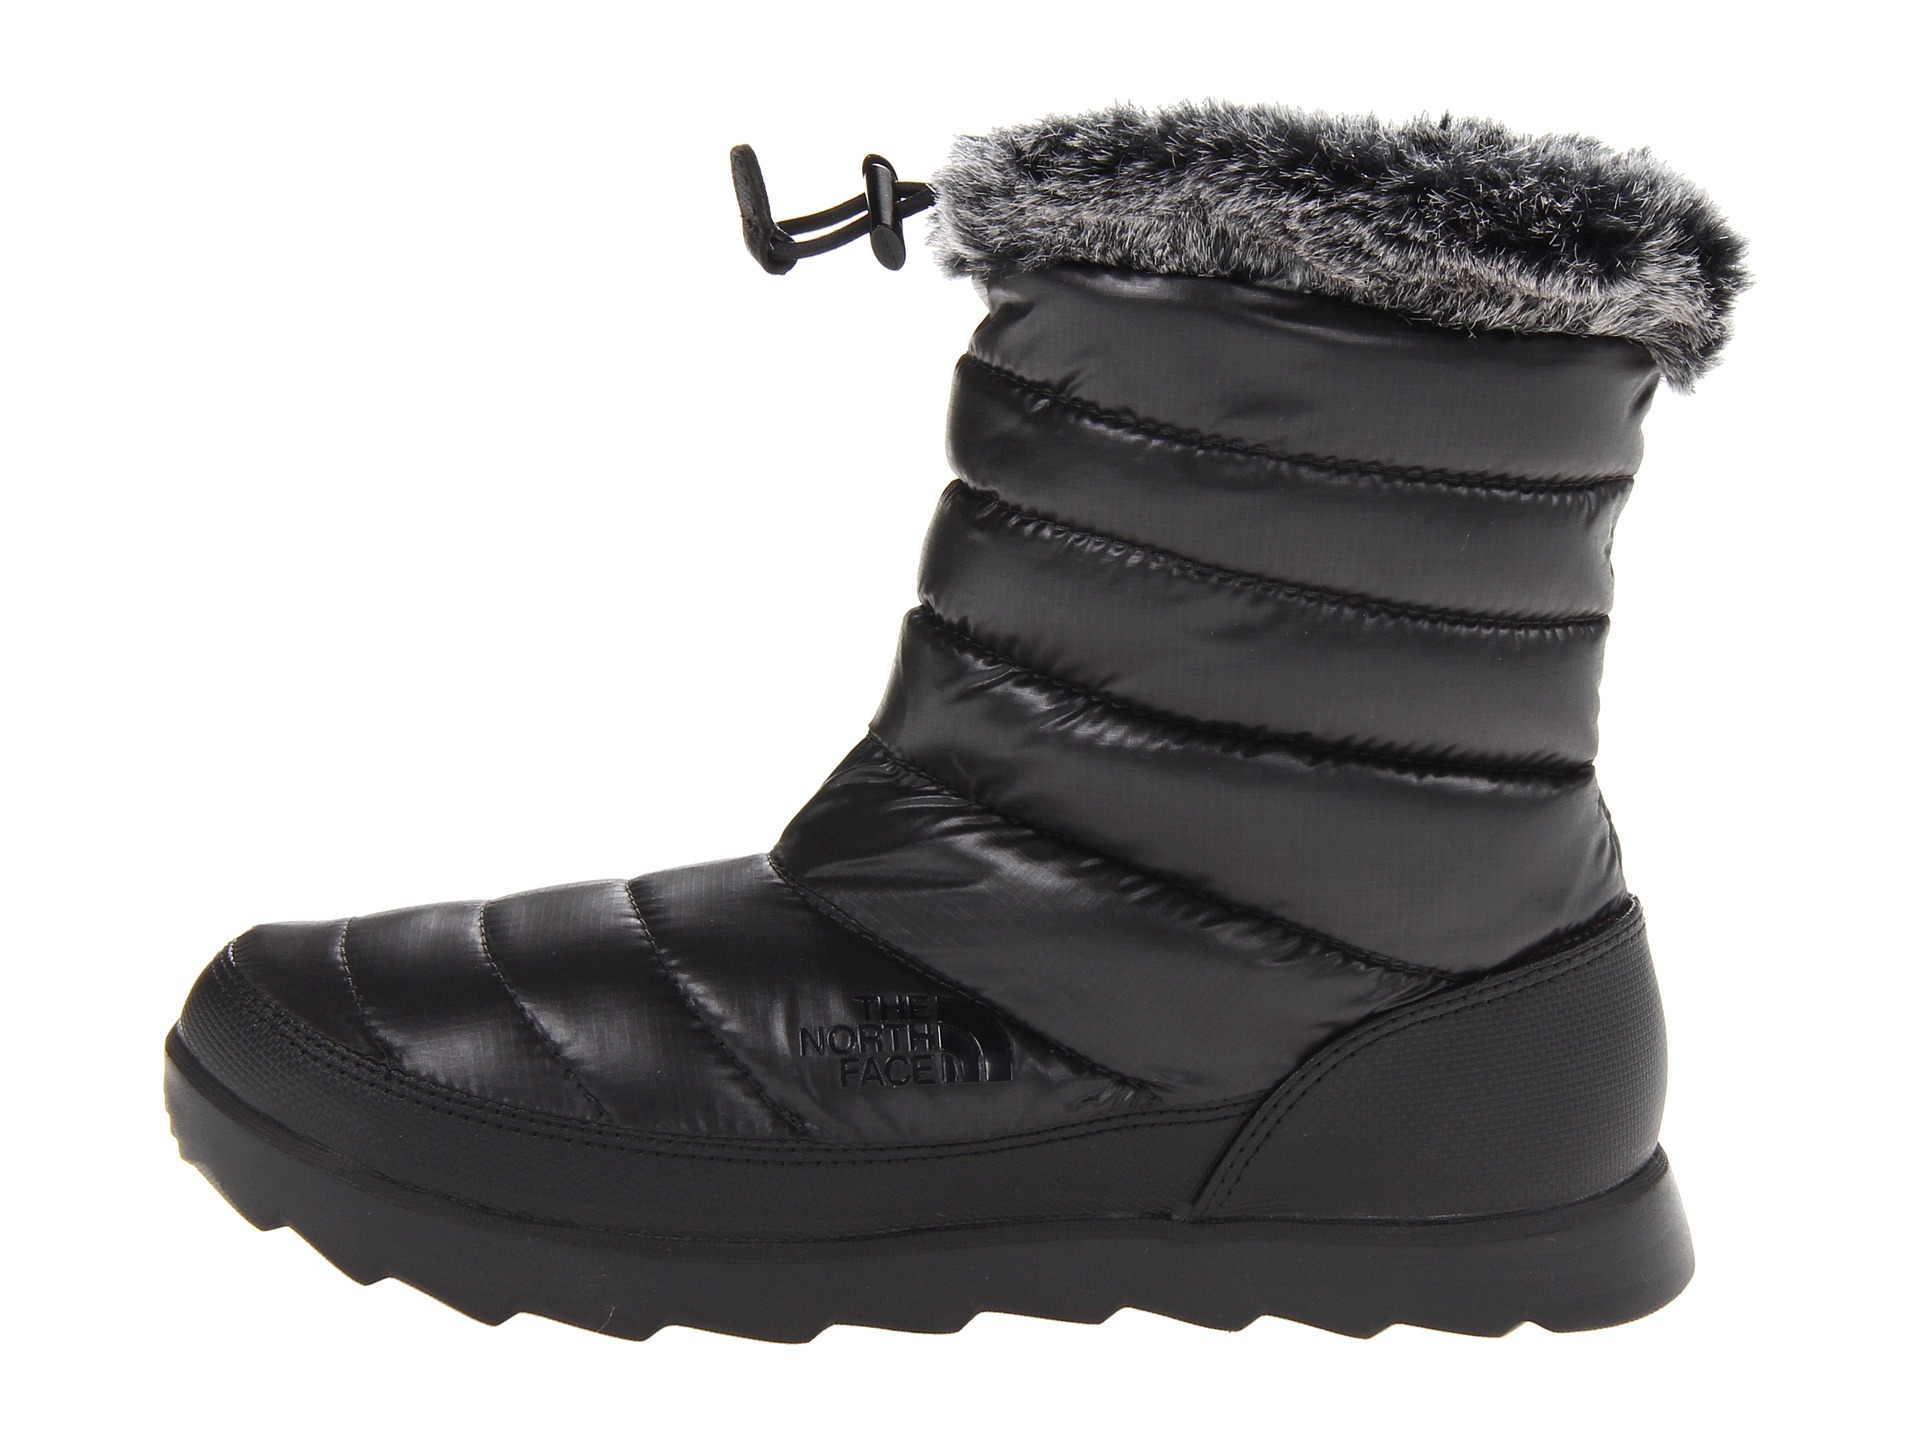 micro baffle bootie winter boots 